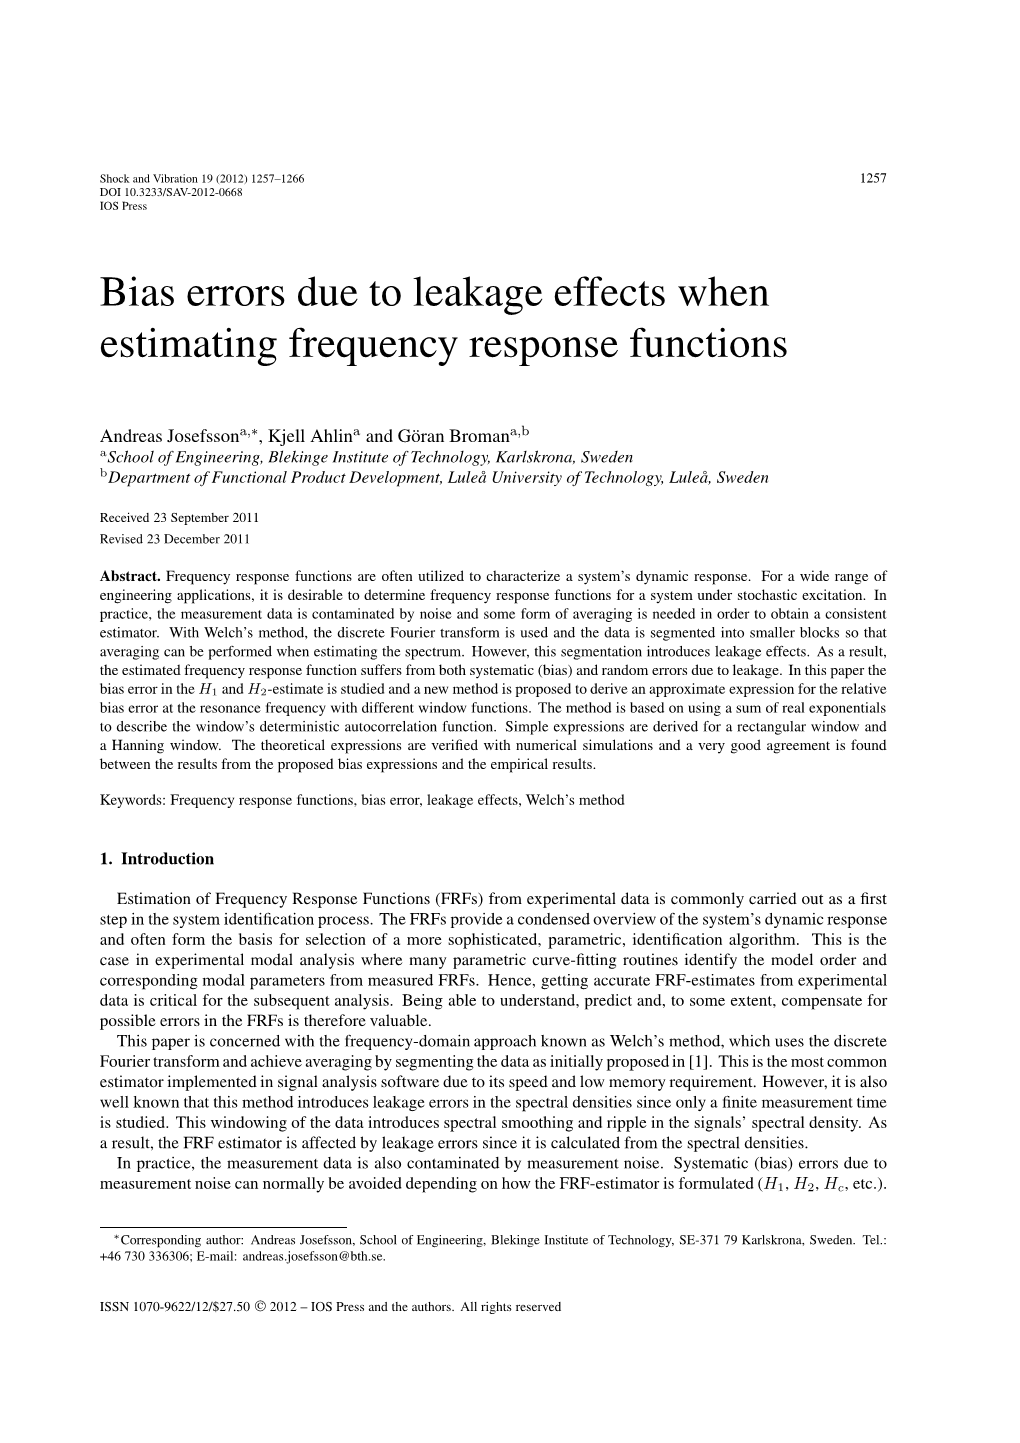 Bias Errors Due to Leakage Effects When Estimating Frequency Response Functions